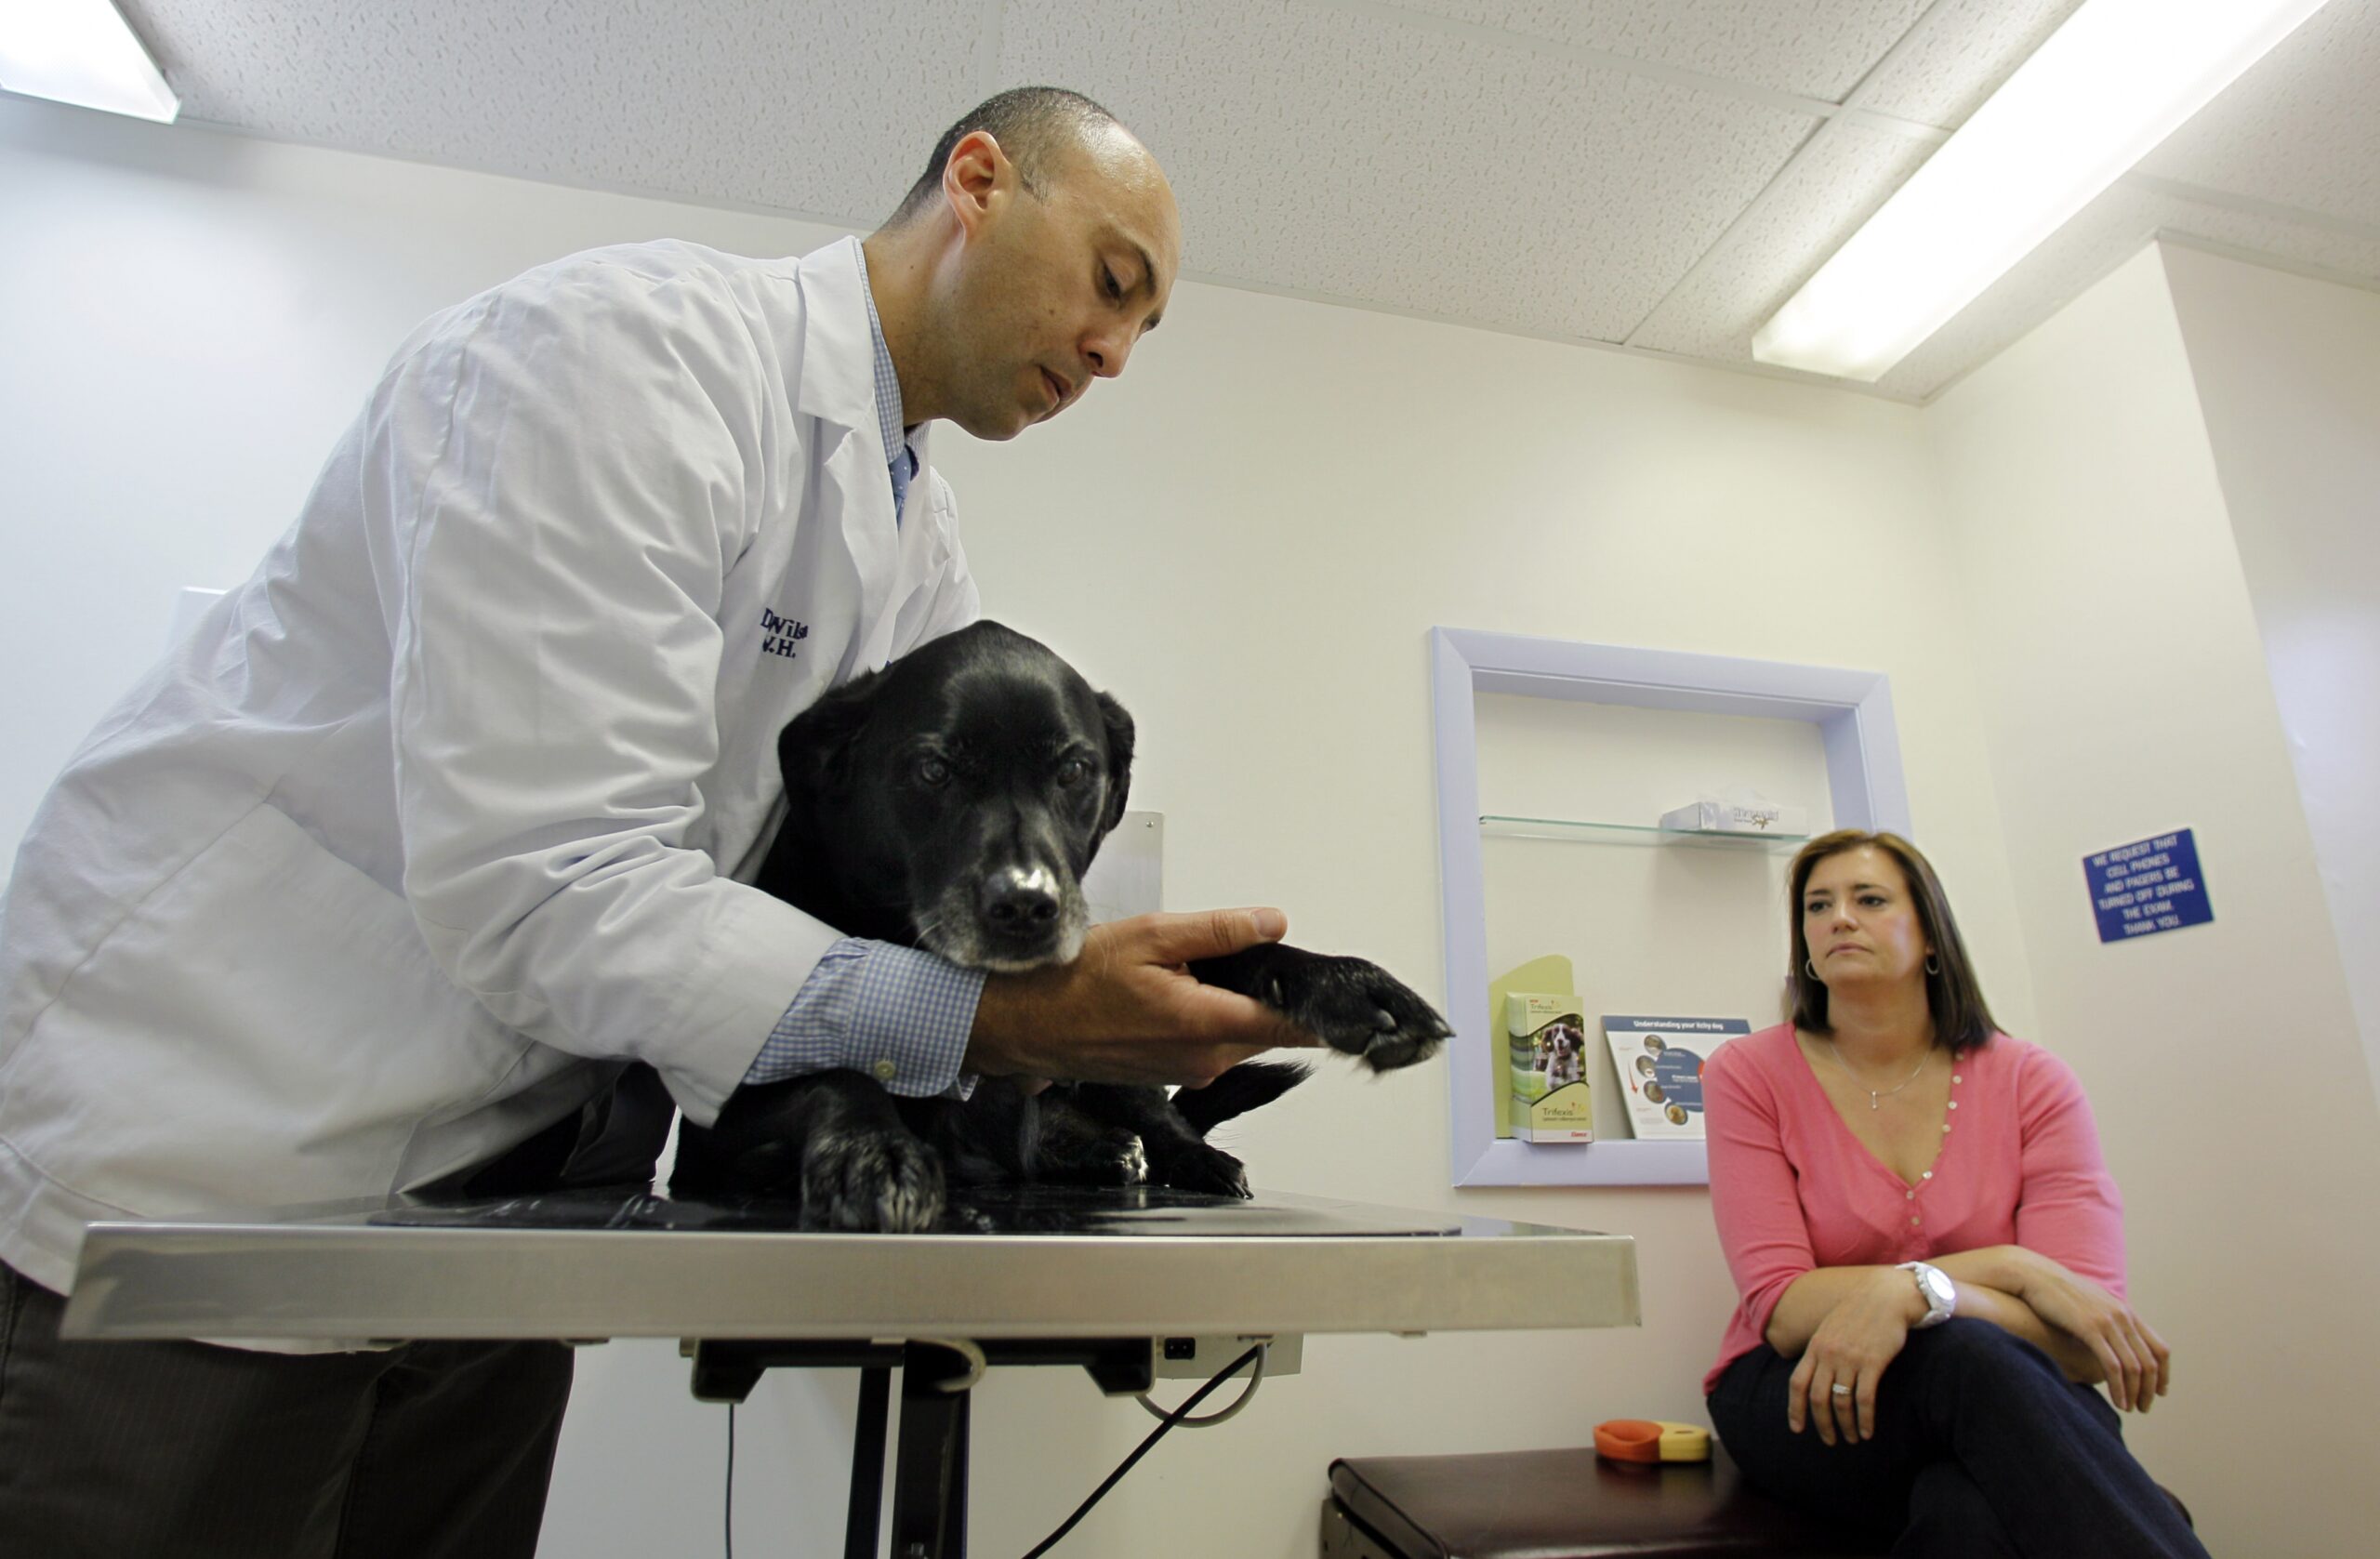 With Maintaining Care In Mind, Veterinarians Adjust Practices During Coronavirus Pandemic